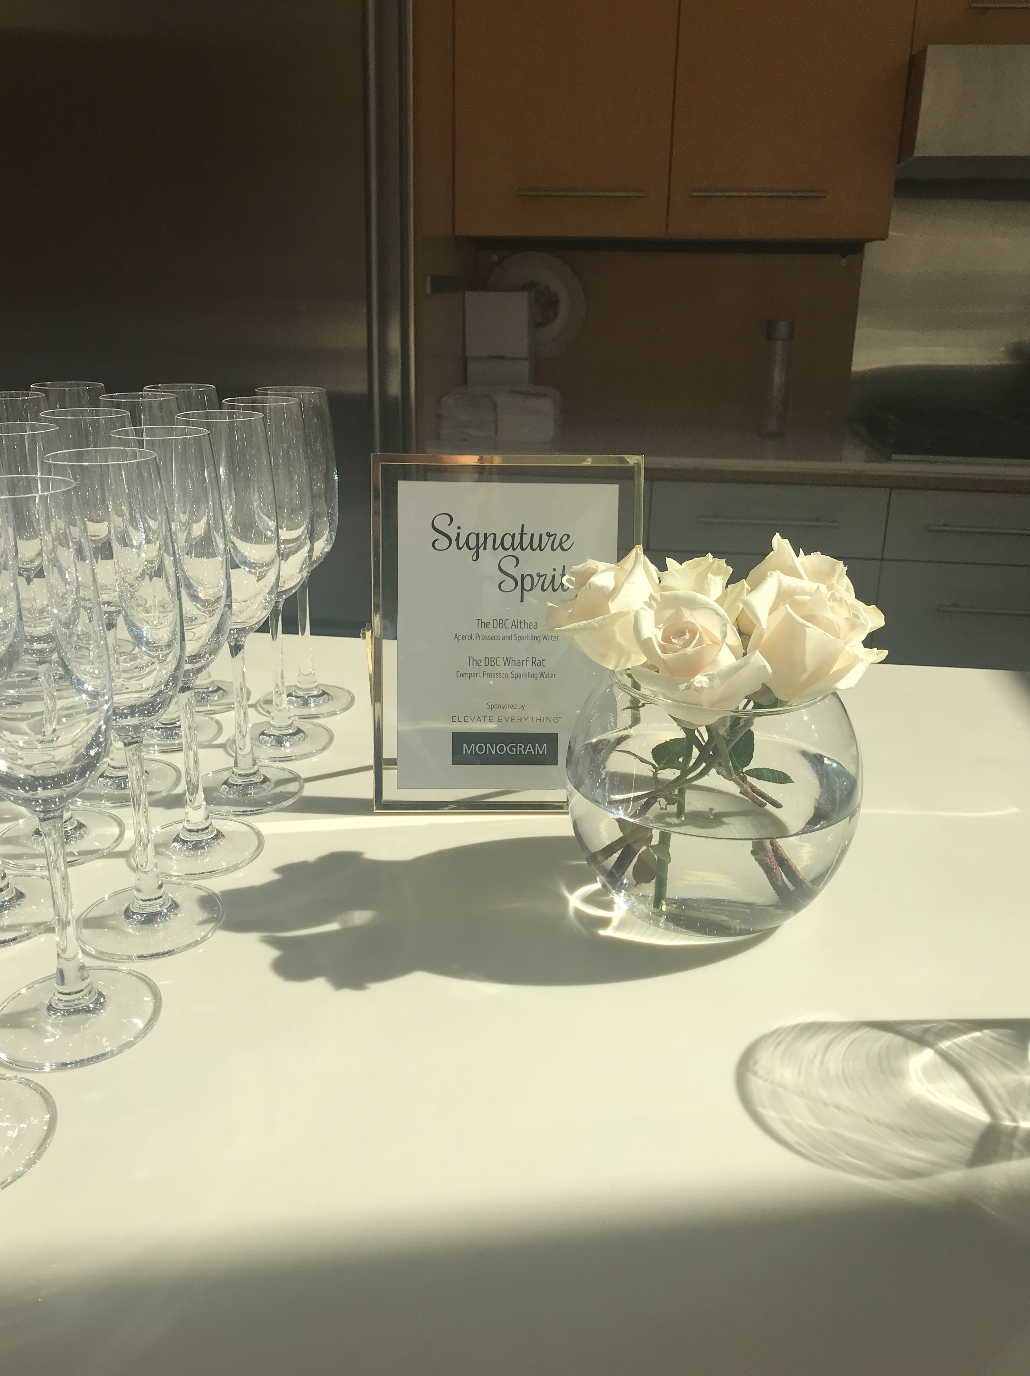 Champagne Spritzers were the drink of the night! I always recommend having one signature drink for an event that keeps things aesthetically cohesive and keeps the bar line short!